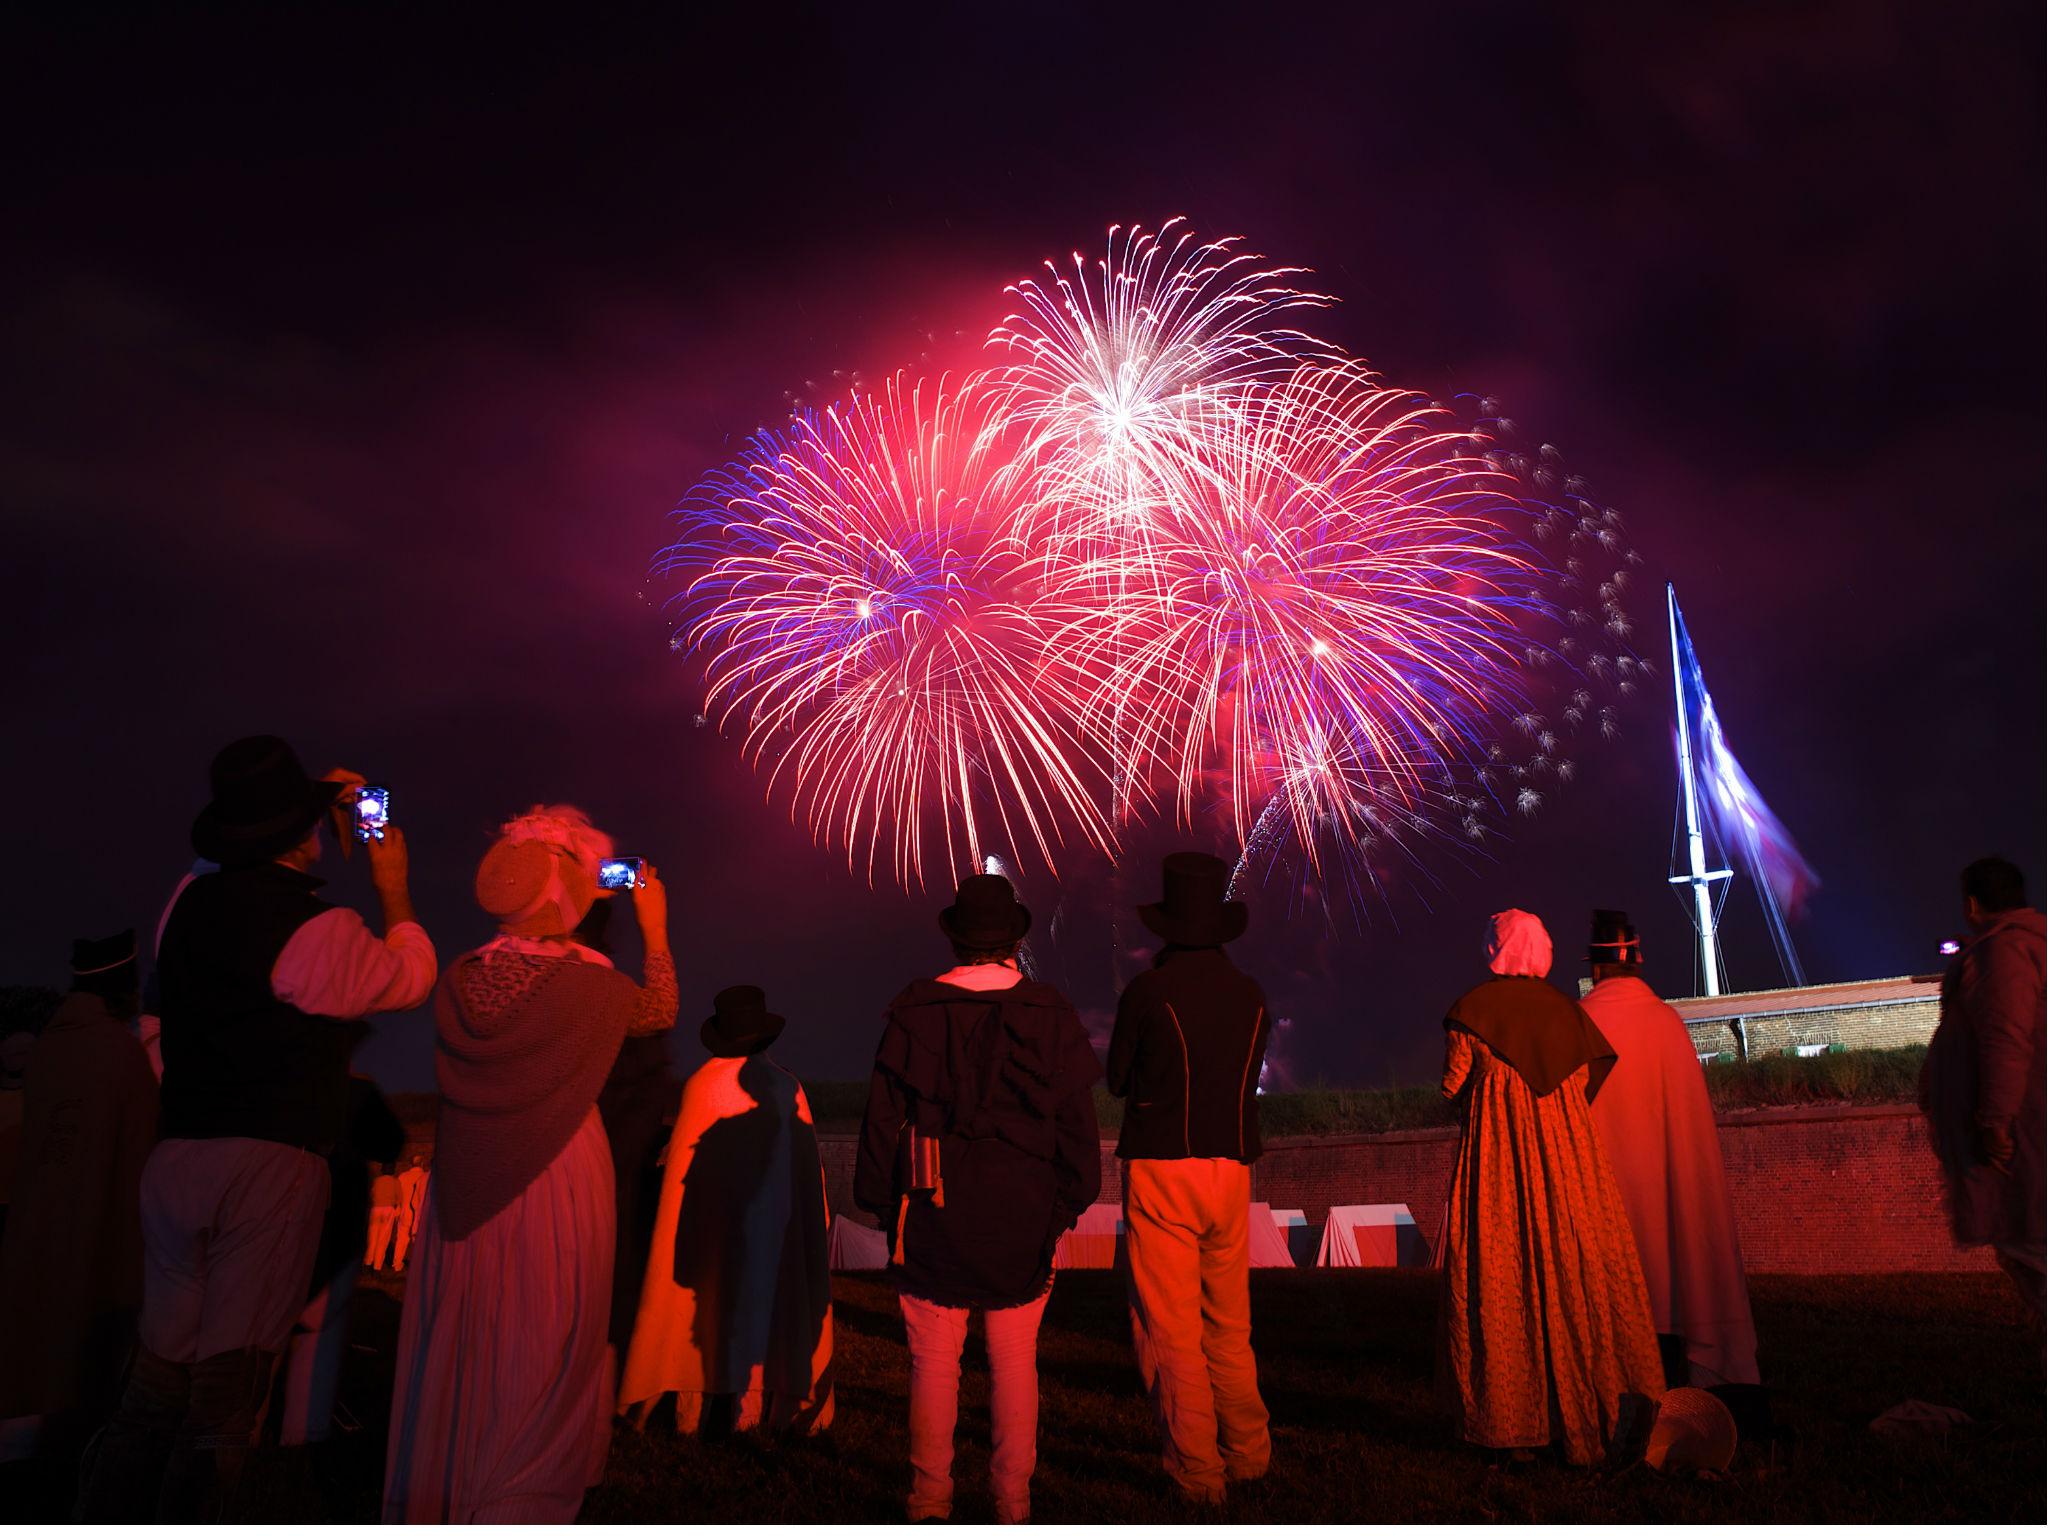 A Sikh community saved the Fourth of July fireworks celebration for a city in California